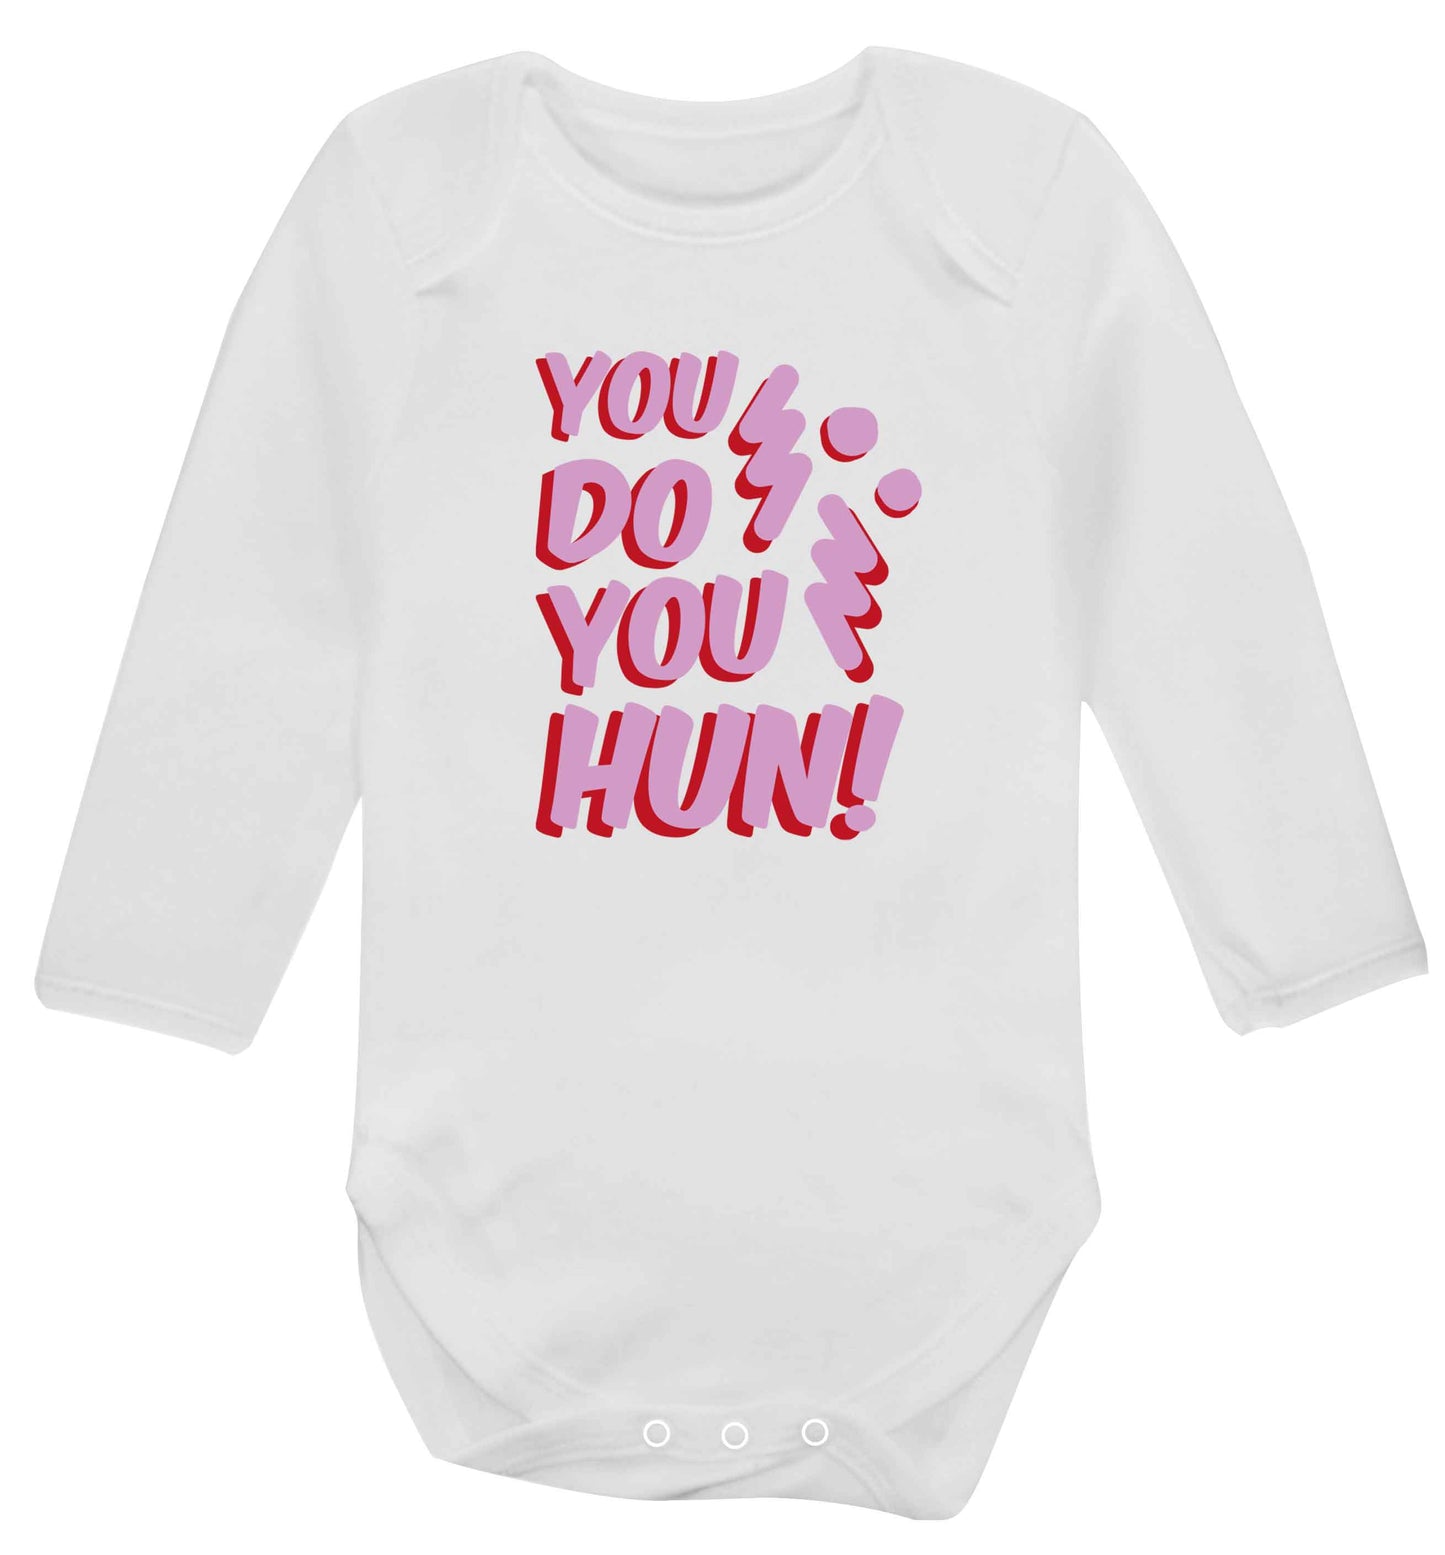 You do you hun baby vest long sleeved white 6-12 months